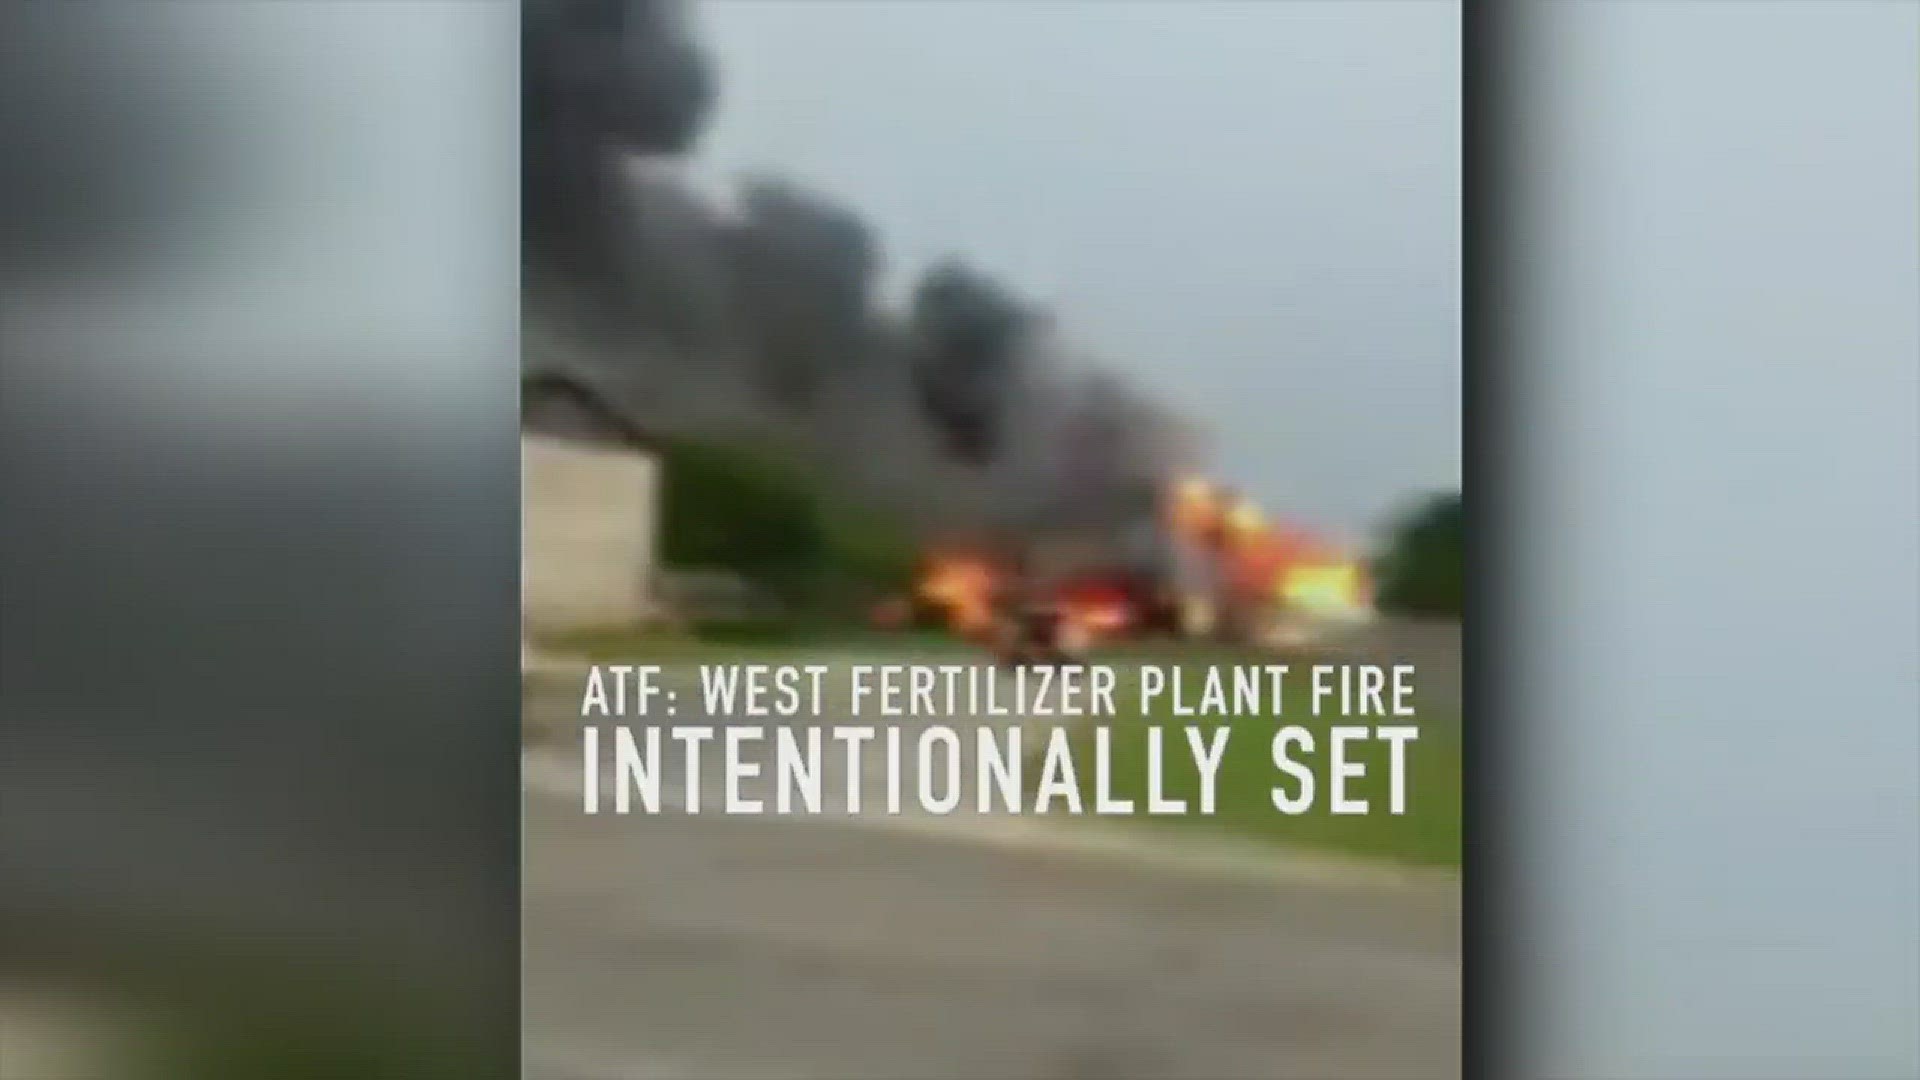 The April 2013 fire, which triggered the West fertilizer plant explosion was intentionally set and has been called 'a criminal act,' the ATF announced on Wednesday.